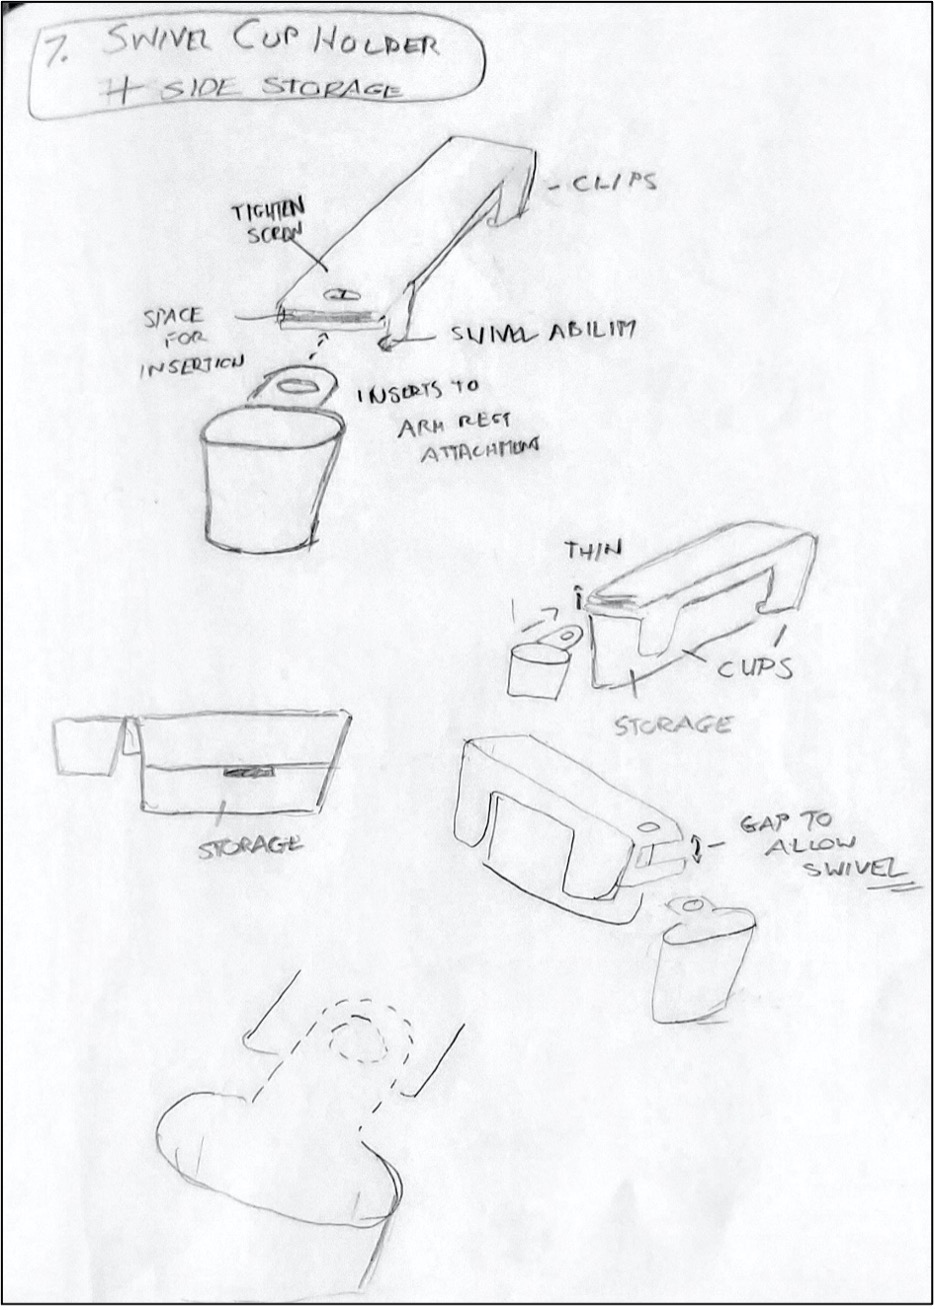 Sketch of a swivel cup and on-armrest storage mechanism.